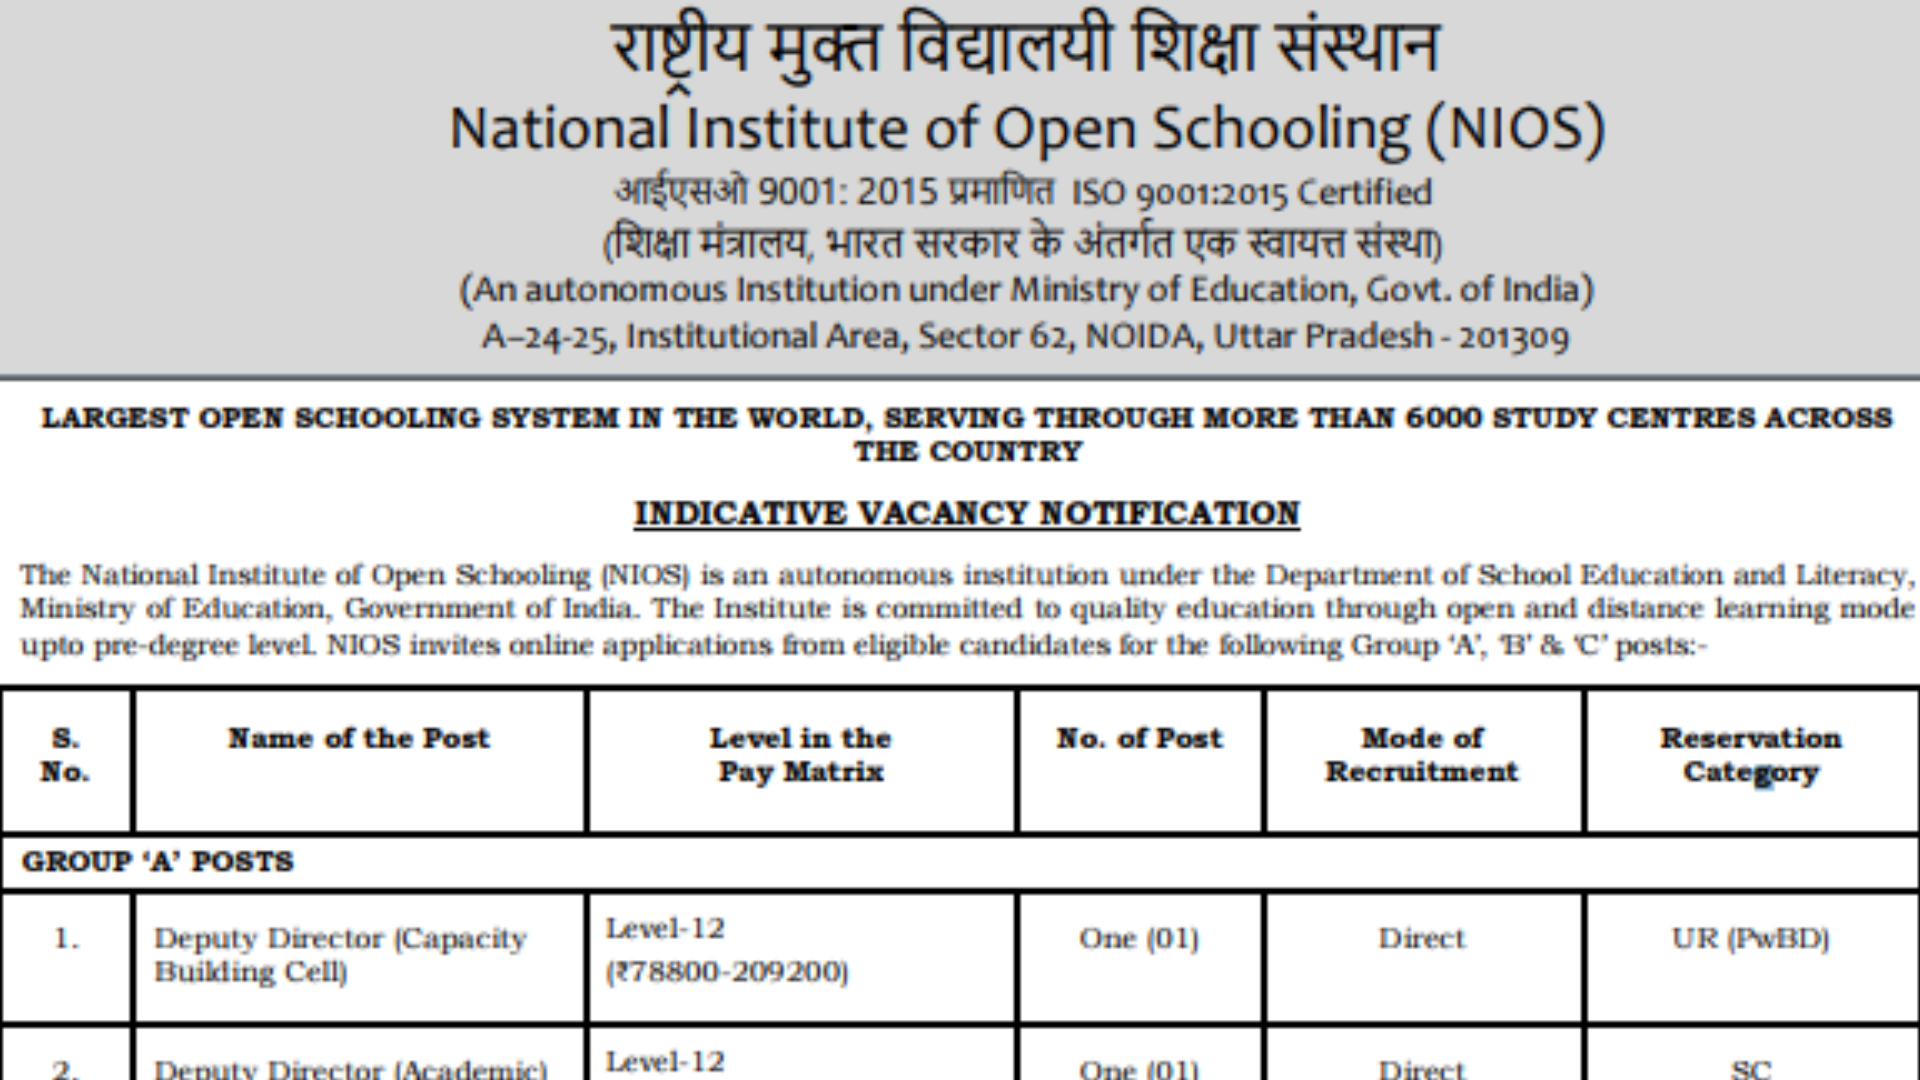 National Institute of Open Schooling NIOS Recruitment 2023 Apply Online for Group A B C Various Post